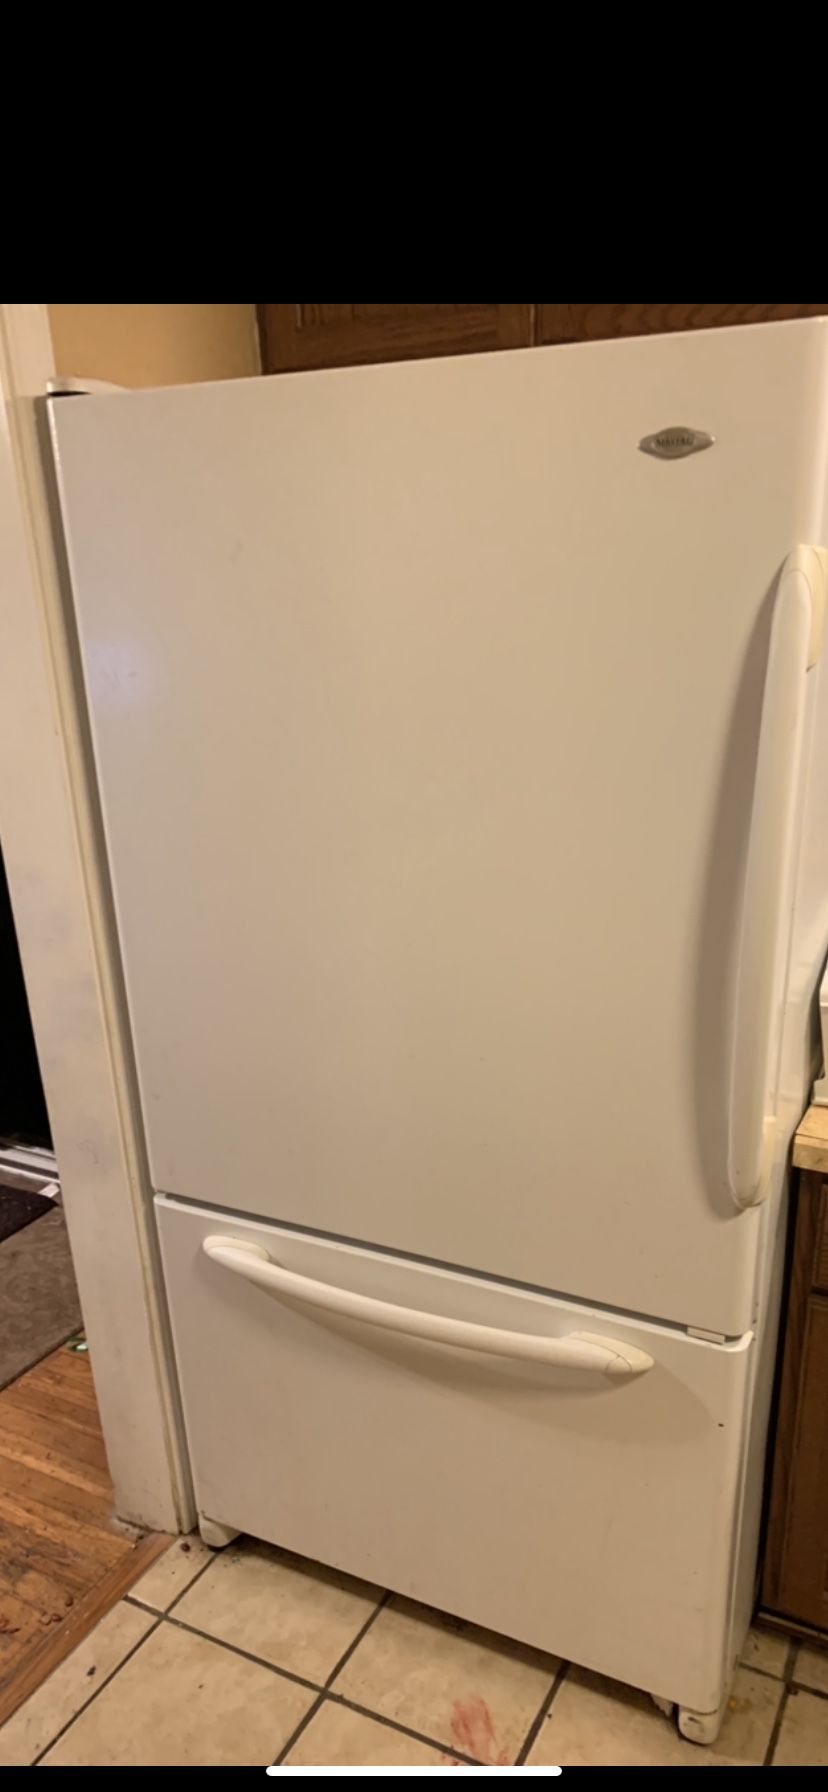 Big Maytag Refrigerator! The width is 35,height 64 and 321/2 in depth